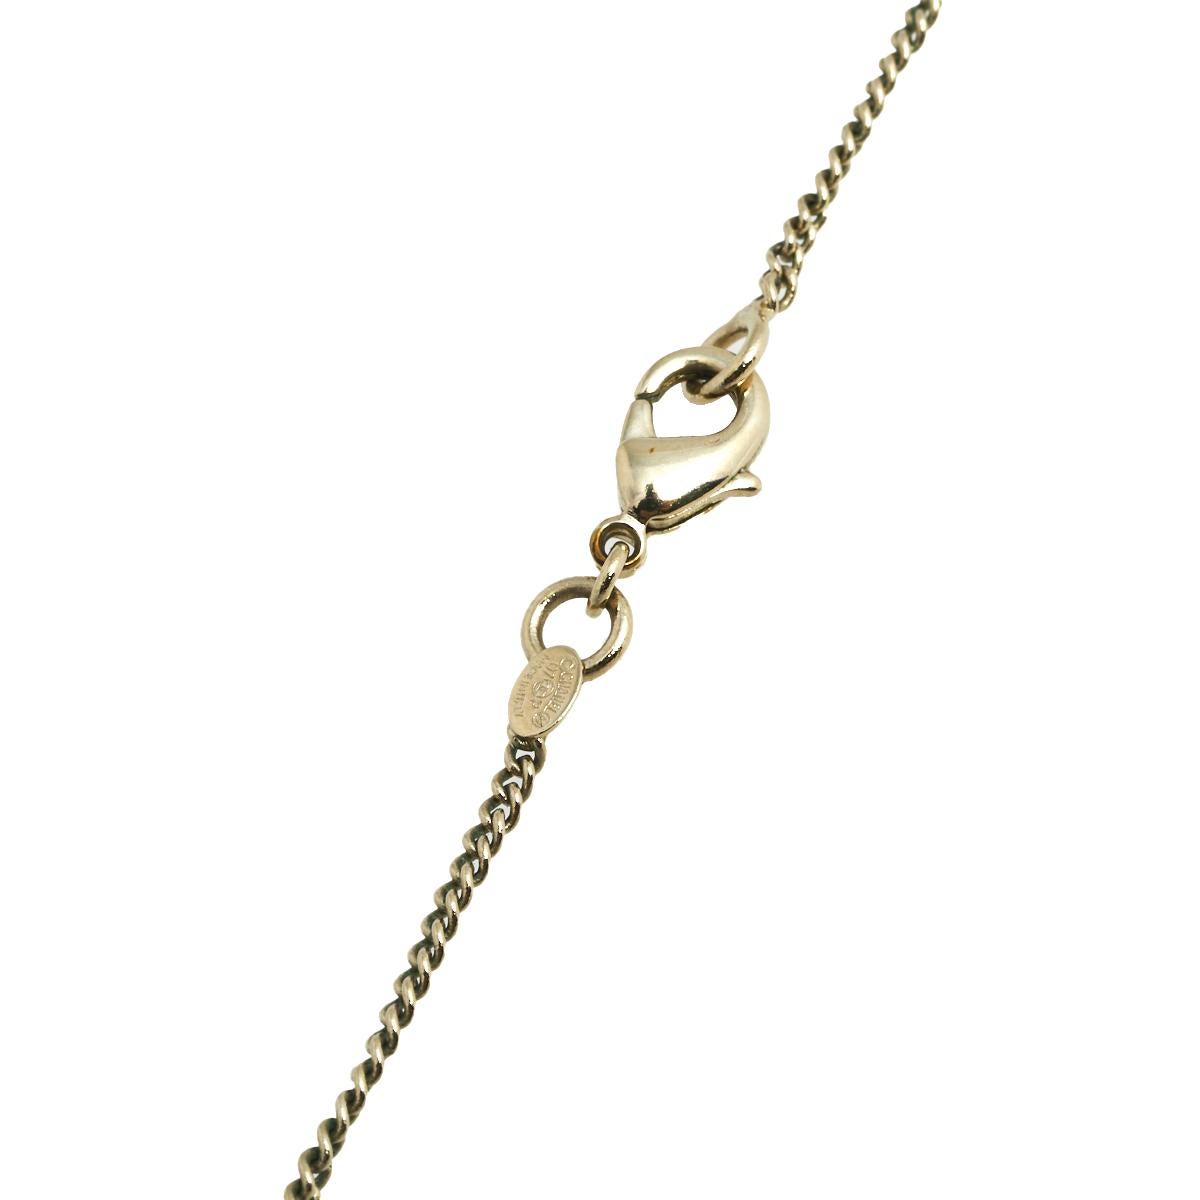 This lovely necklace by Chanel will make a timeless addition to your collection. Crafted from gold-tone metal, this gorgeous creation has a chain that holds a pendant of a dangling CC logo and the iconic flap bag as a charm. It is finished with